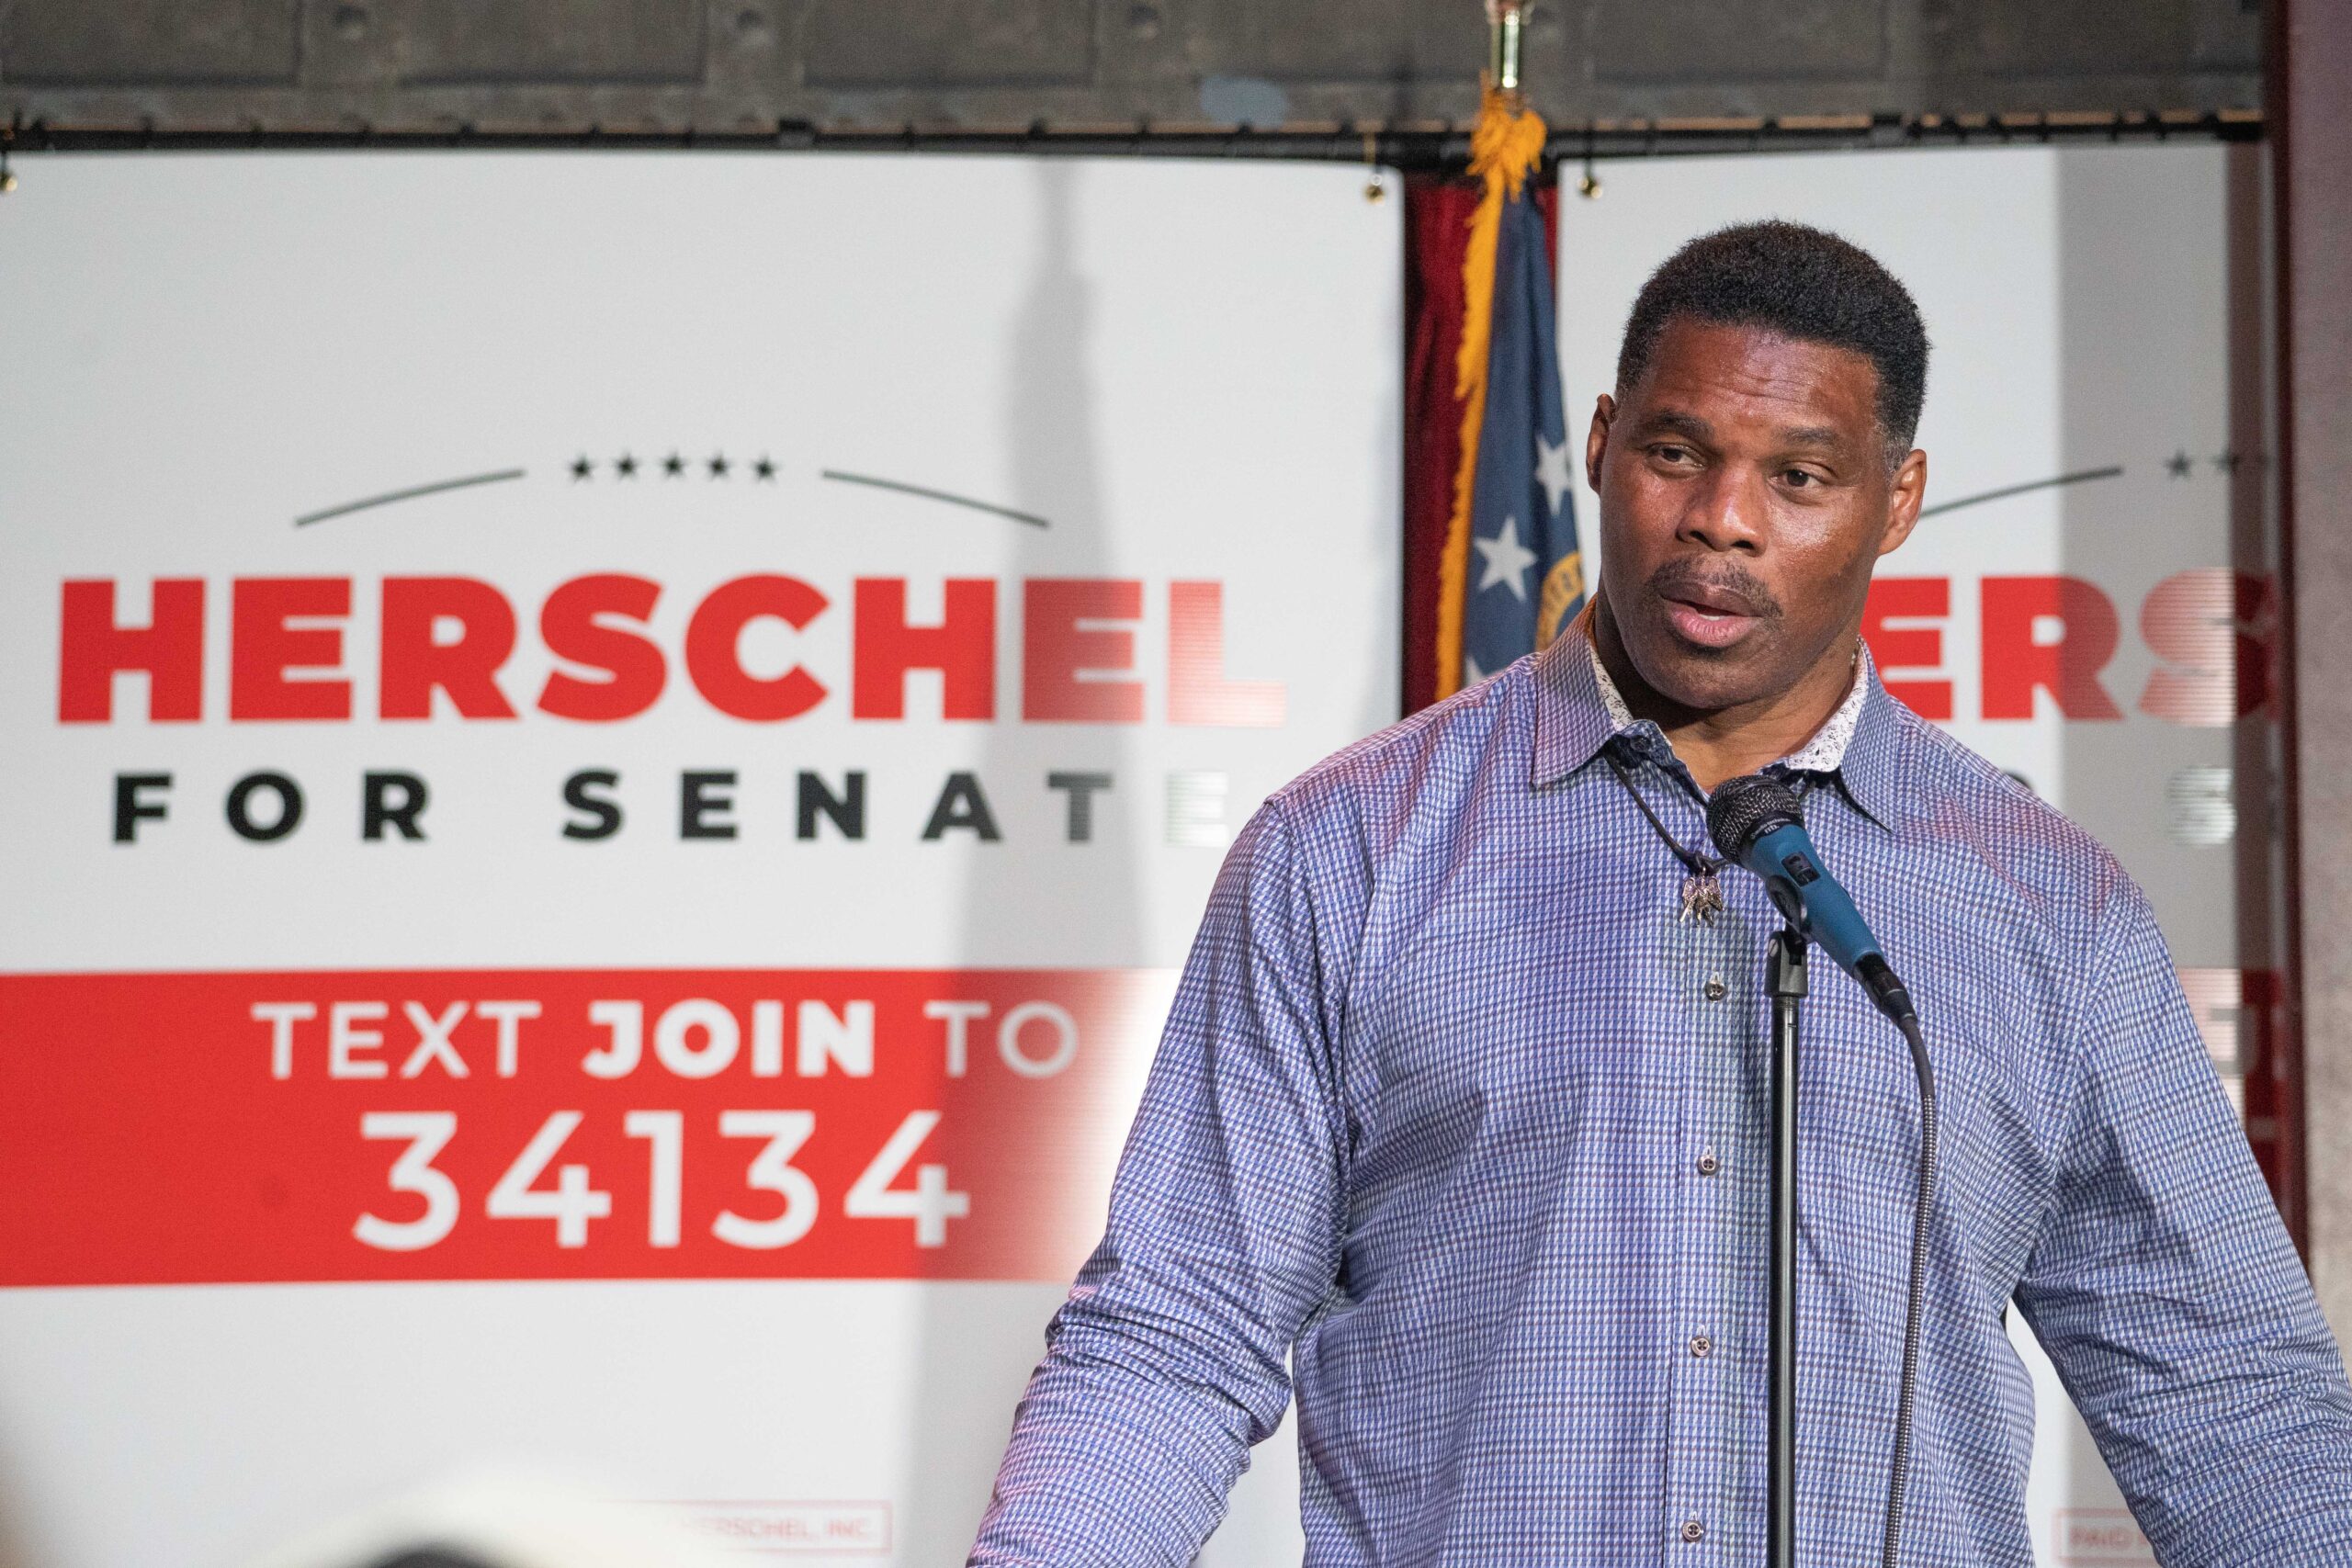 Herschel Walker, Who Hasn’t Had a Presser in Almost Two Months, Reportedly Distancing Journalists ‘20 Feet’ After Events